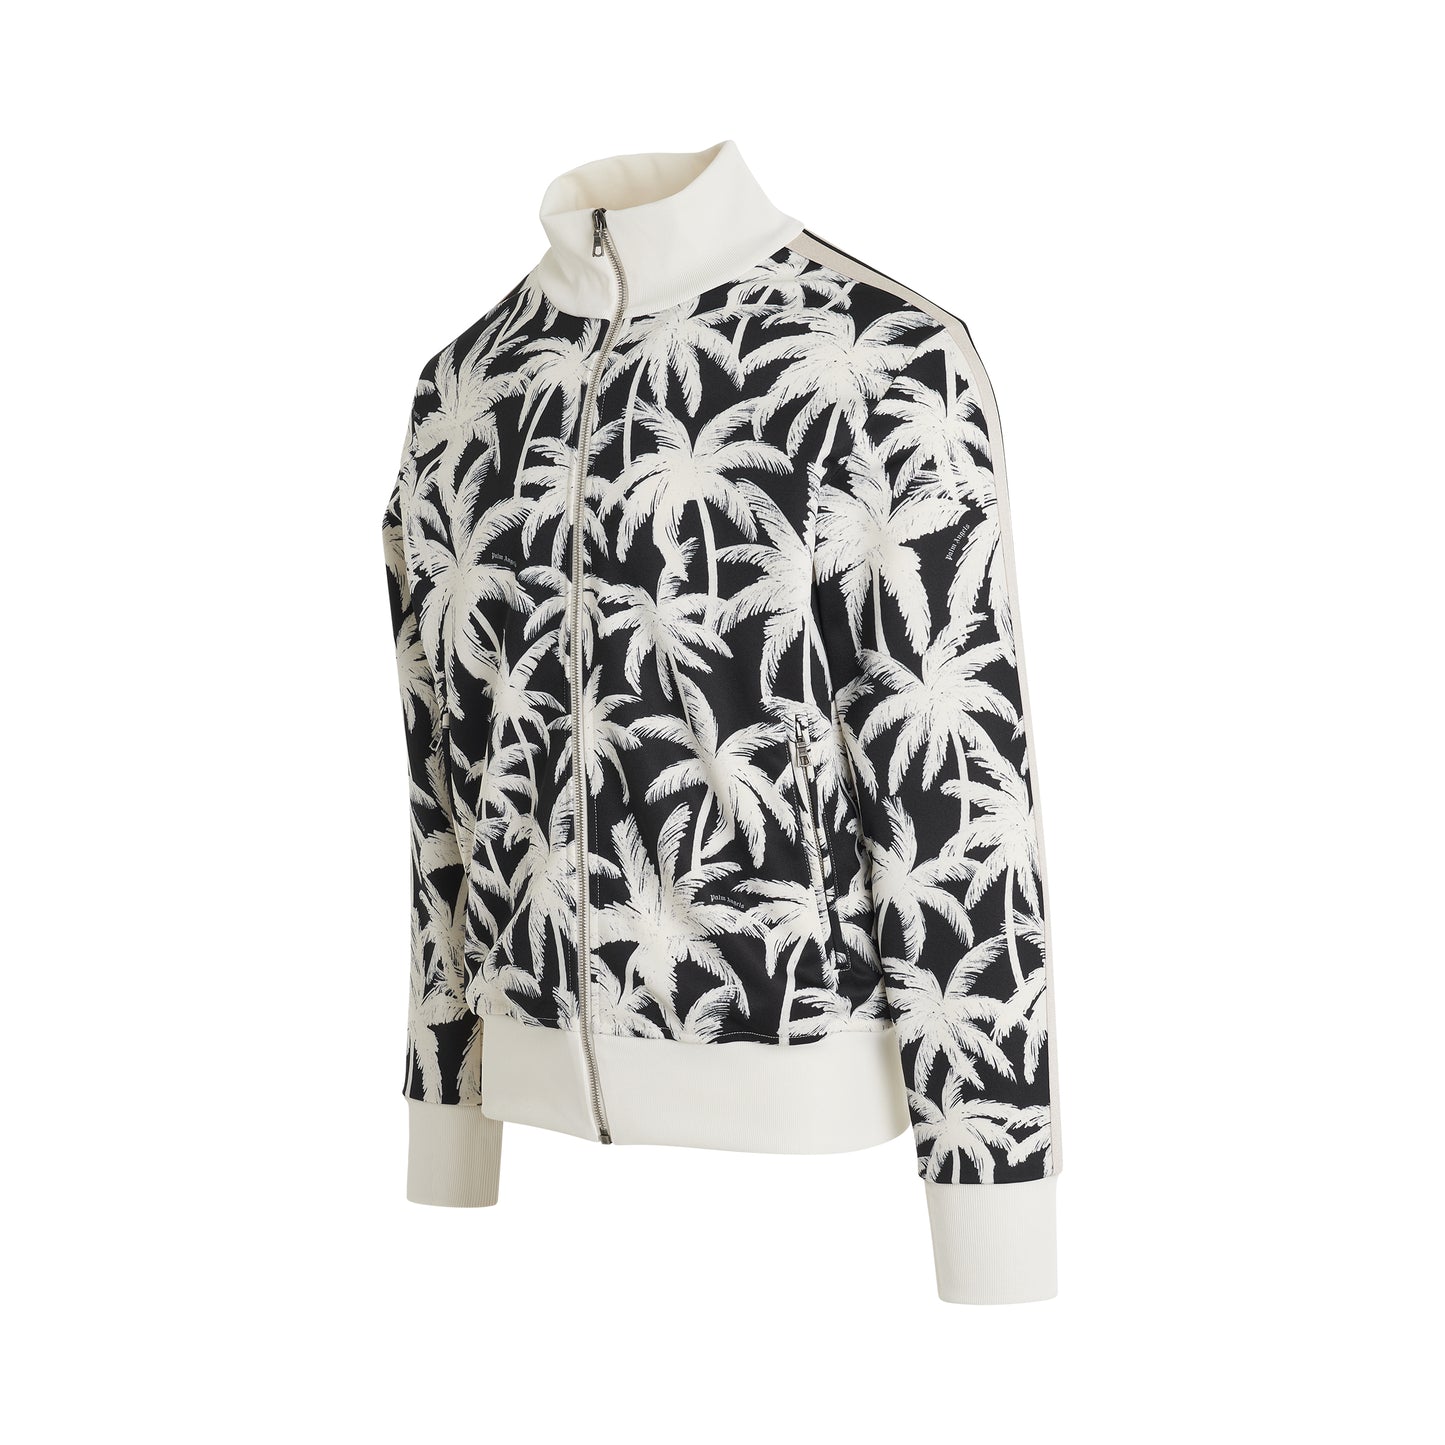 Palms All over Track Jacket in Black/Off White